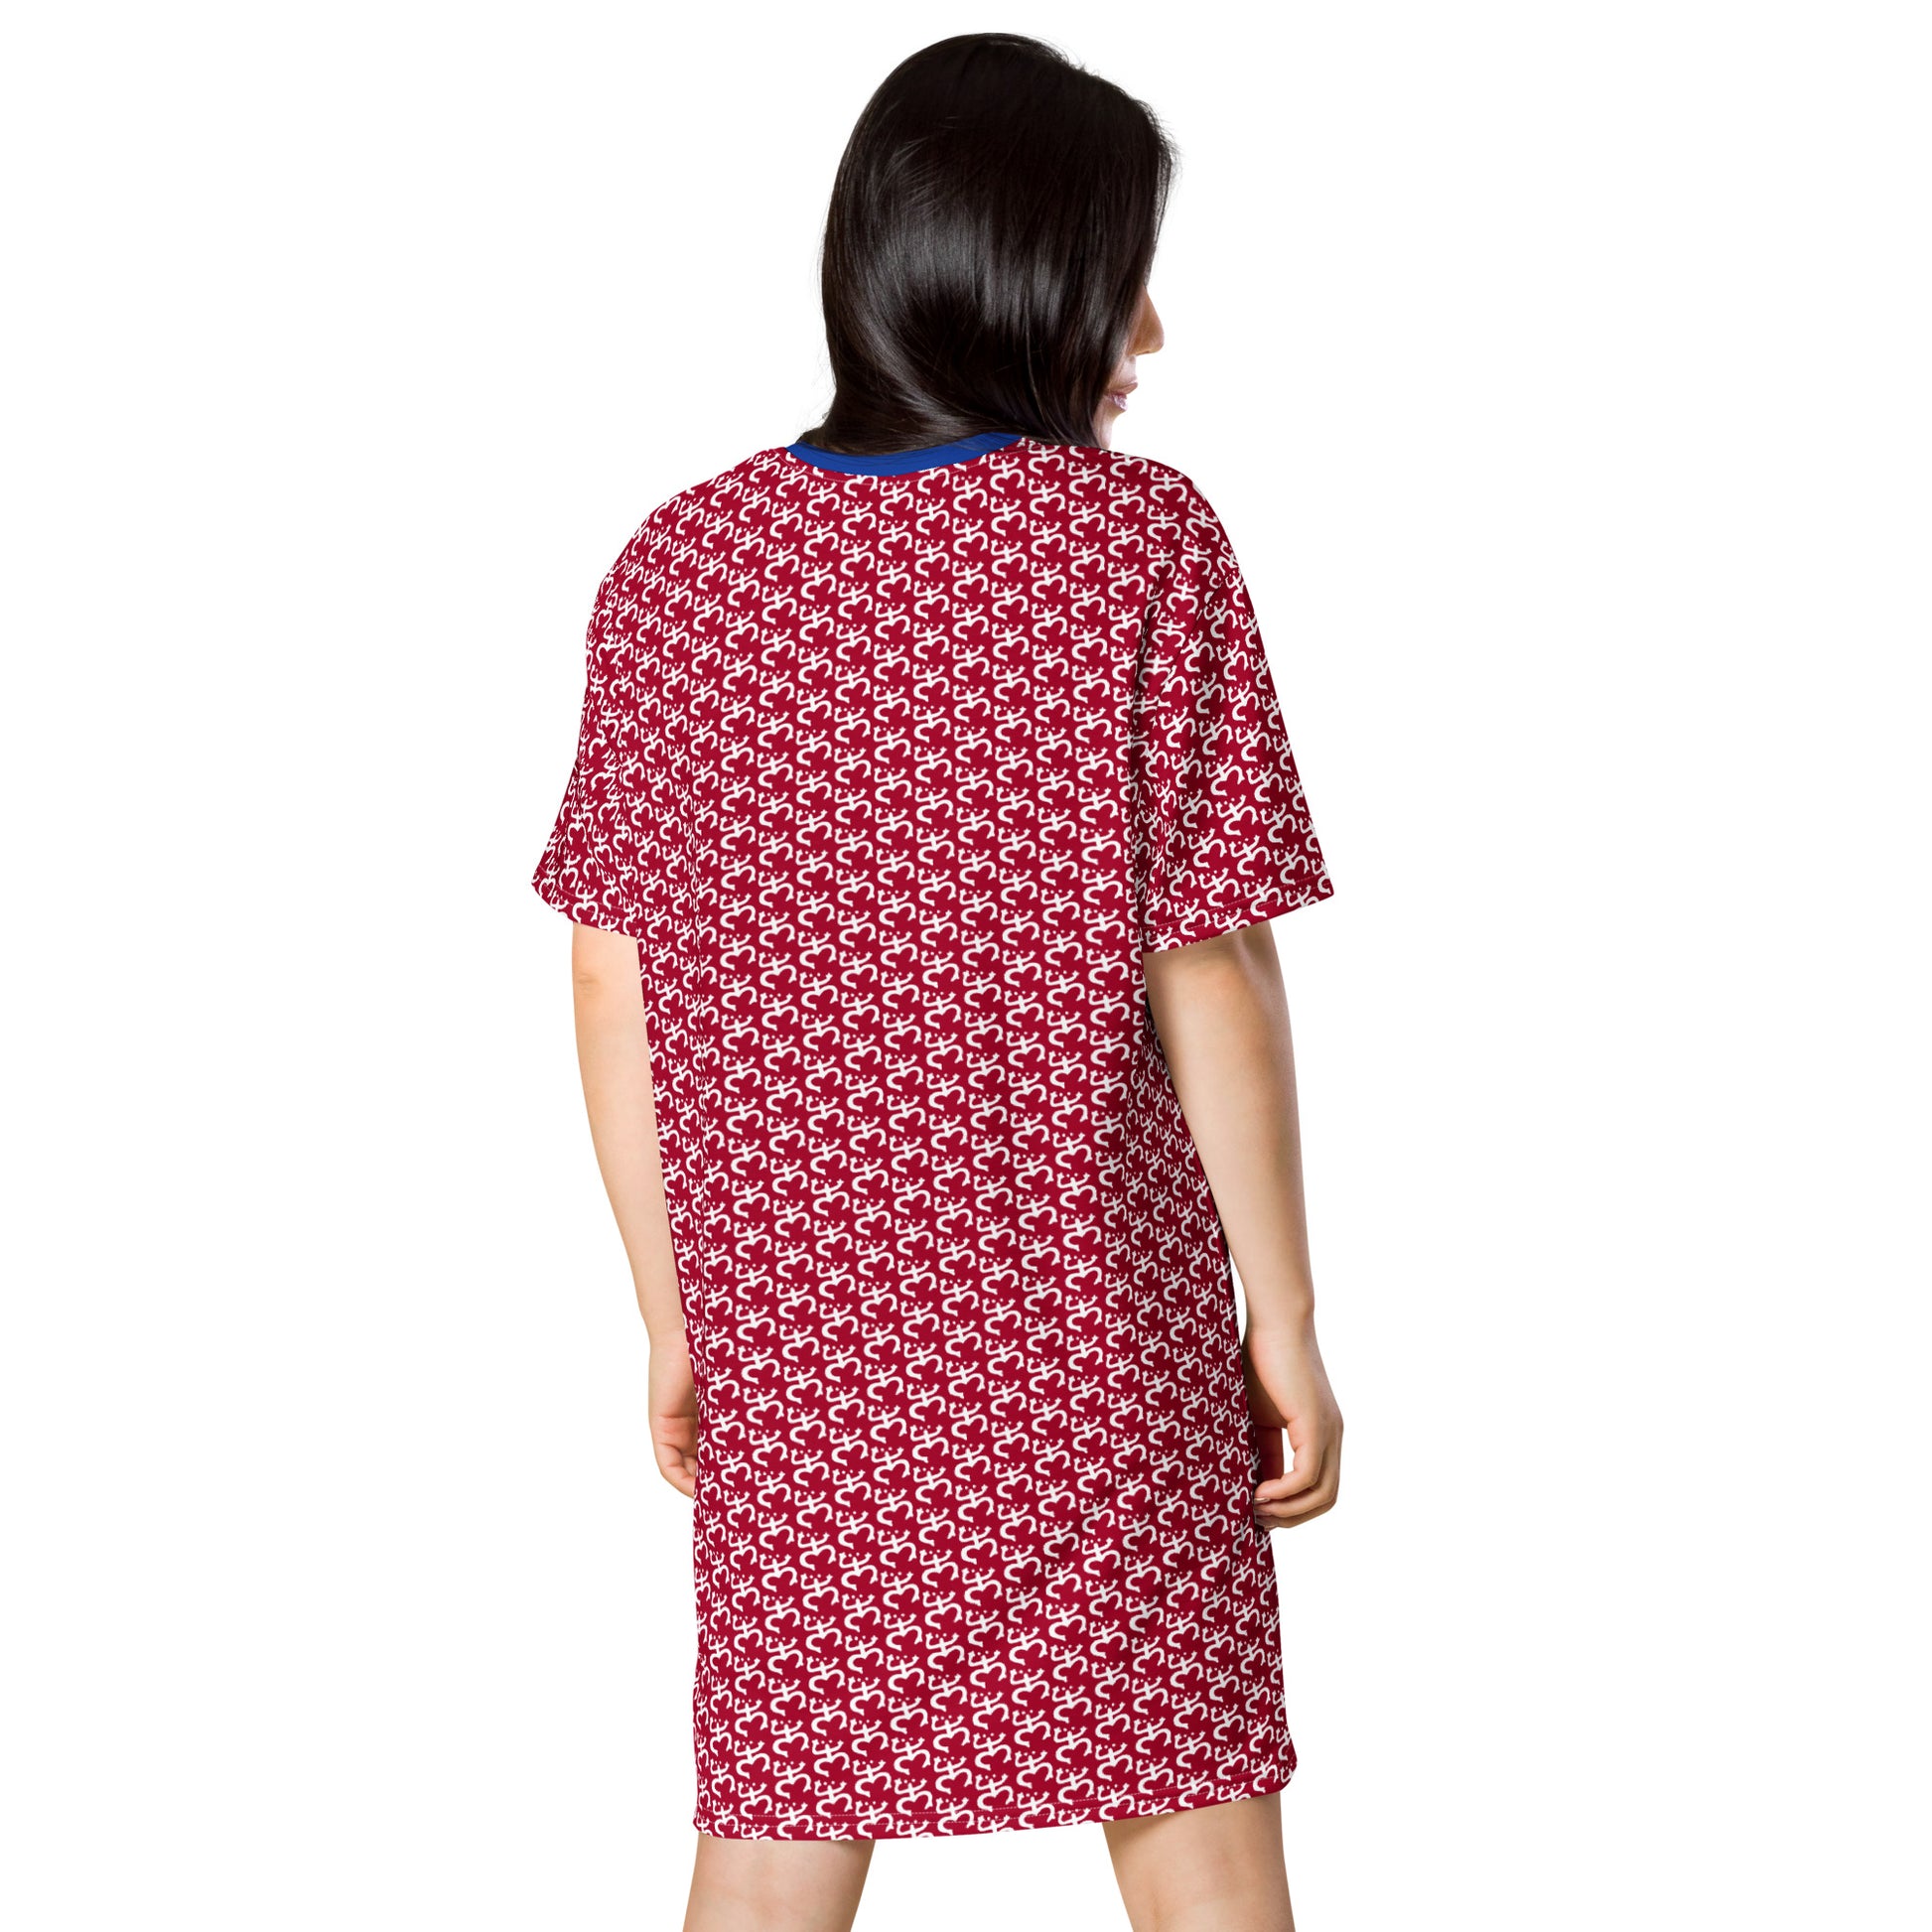 Viva Puerto Rico! Red T-Shirt Dress with Coqui Frog Symbol